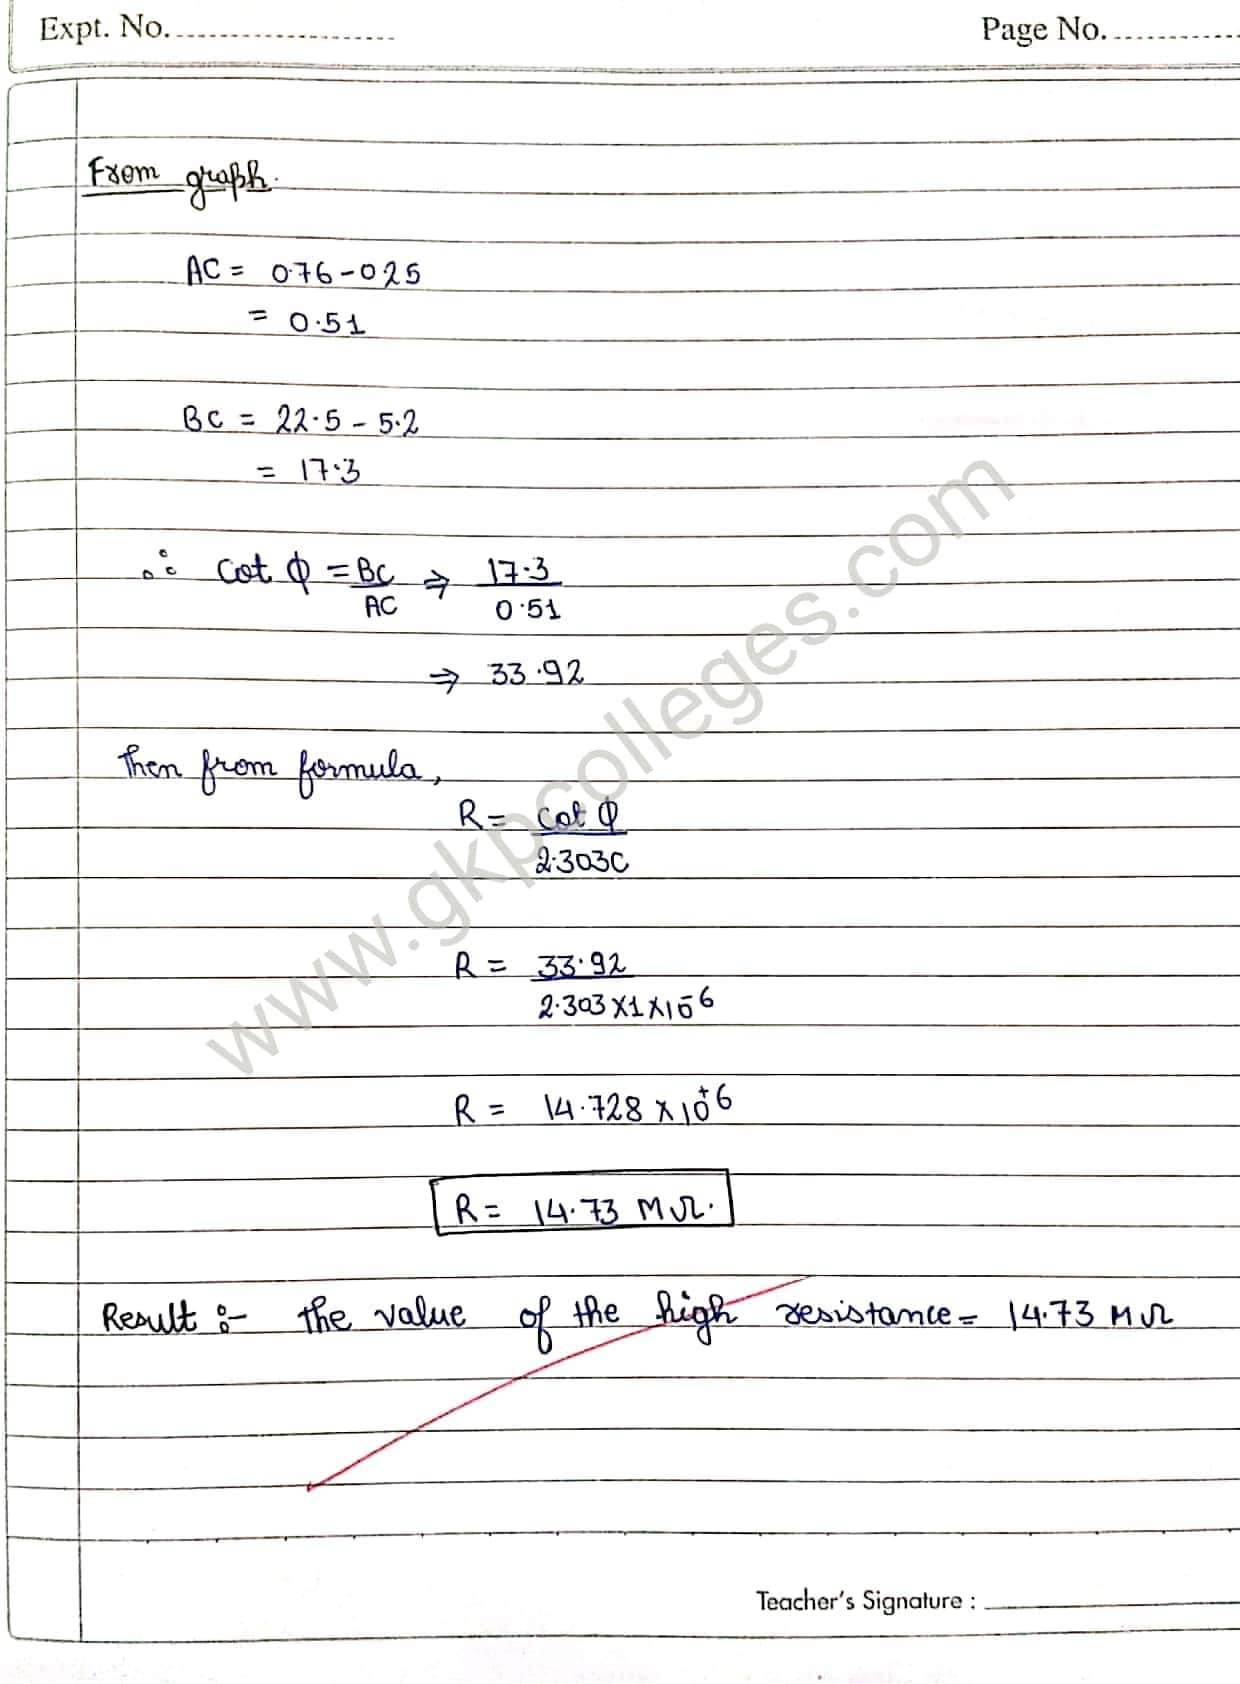 Physics(Electronics) Practical Notes of B.Sc. 2nd Year Student for DDU and St. Andrew's PG College, Gorakhpur